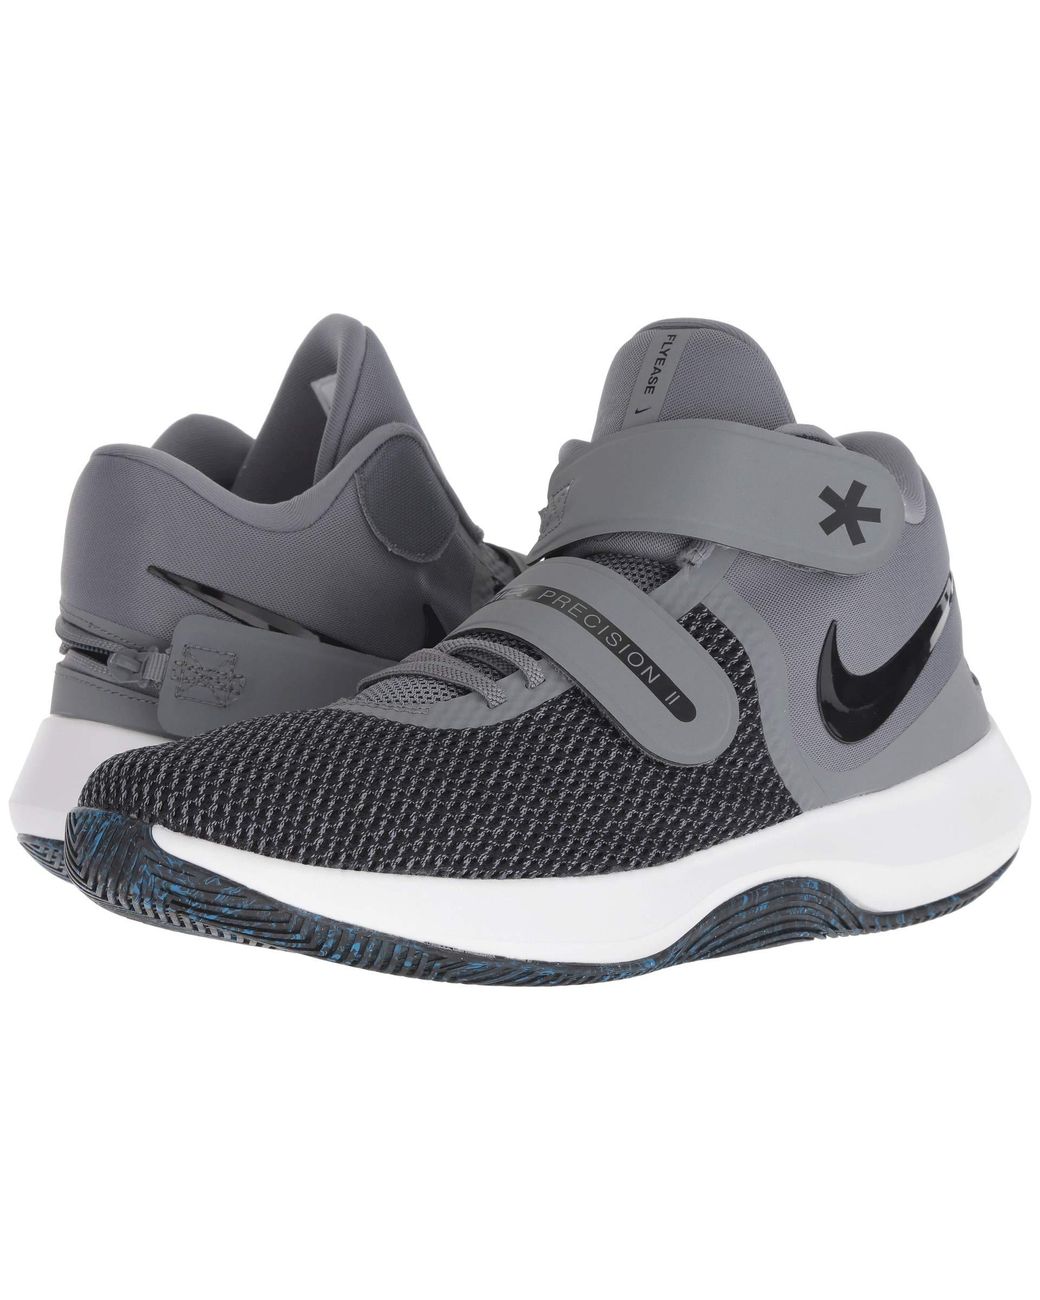 Nike Flyease Air Precision Ii in Gray for Men